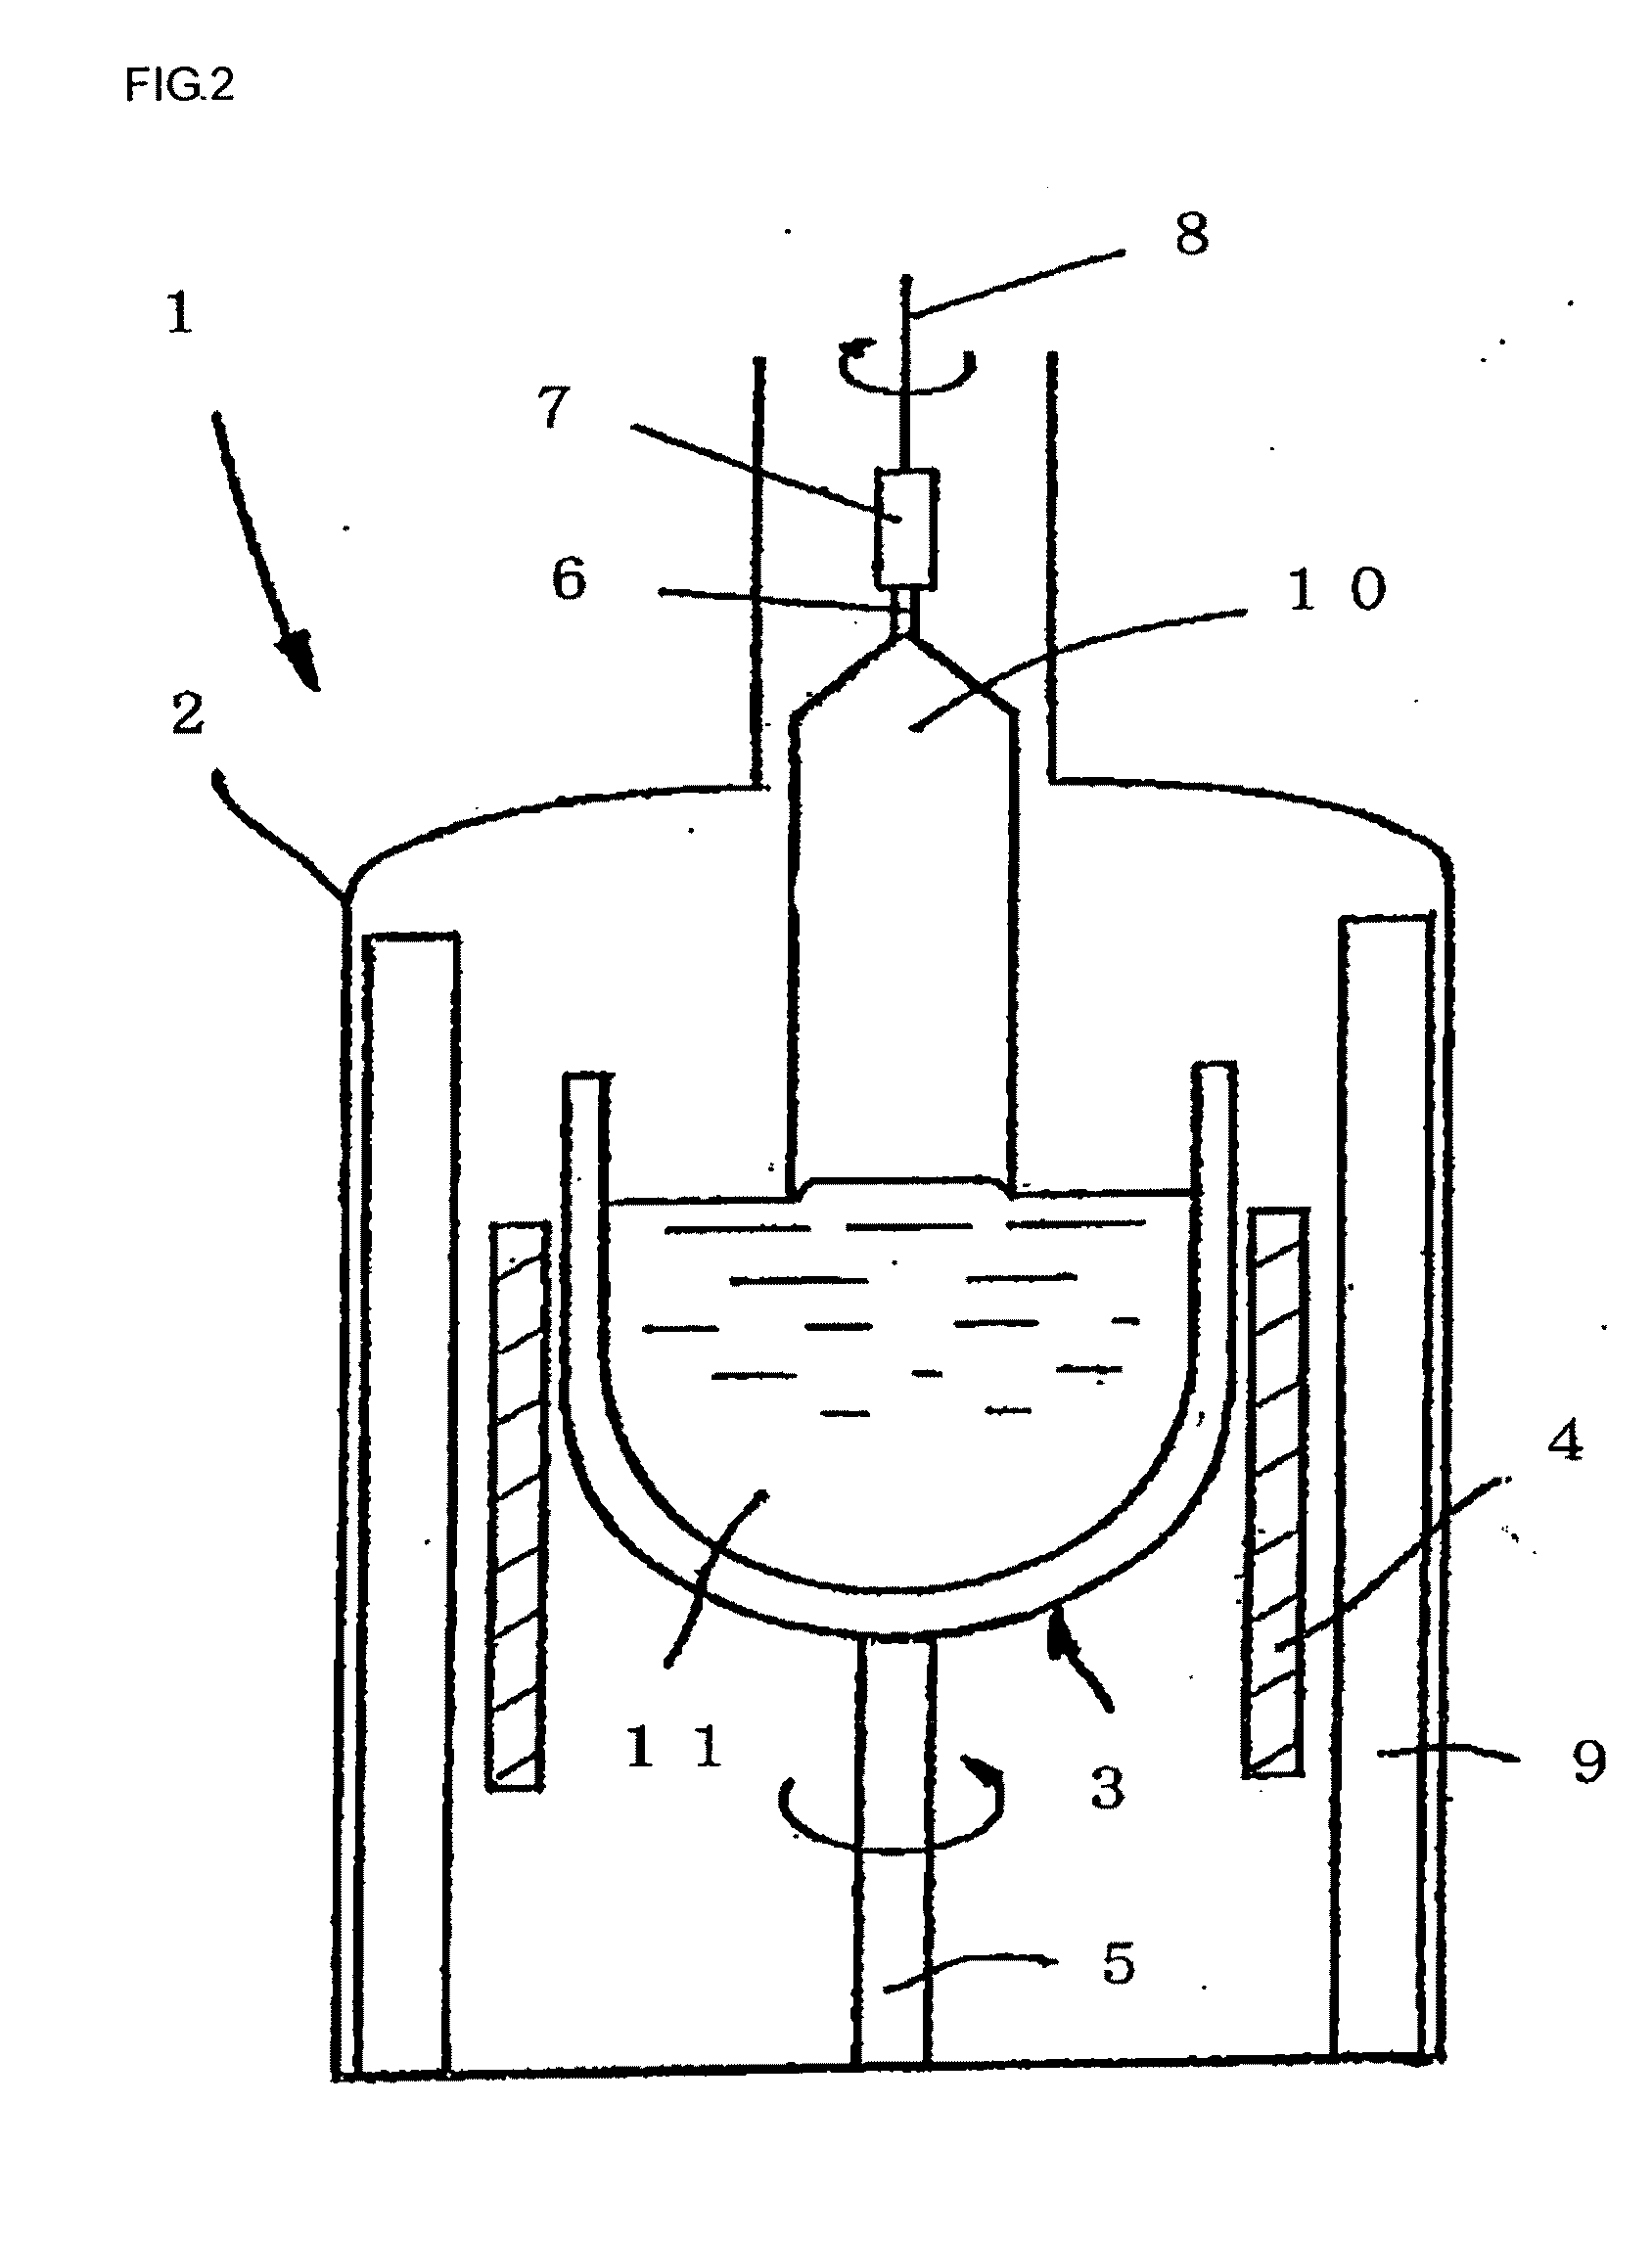 Method for manufacturing silicon single crystal wafer